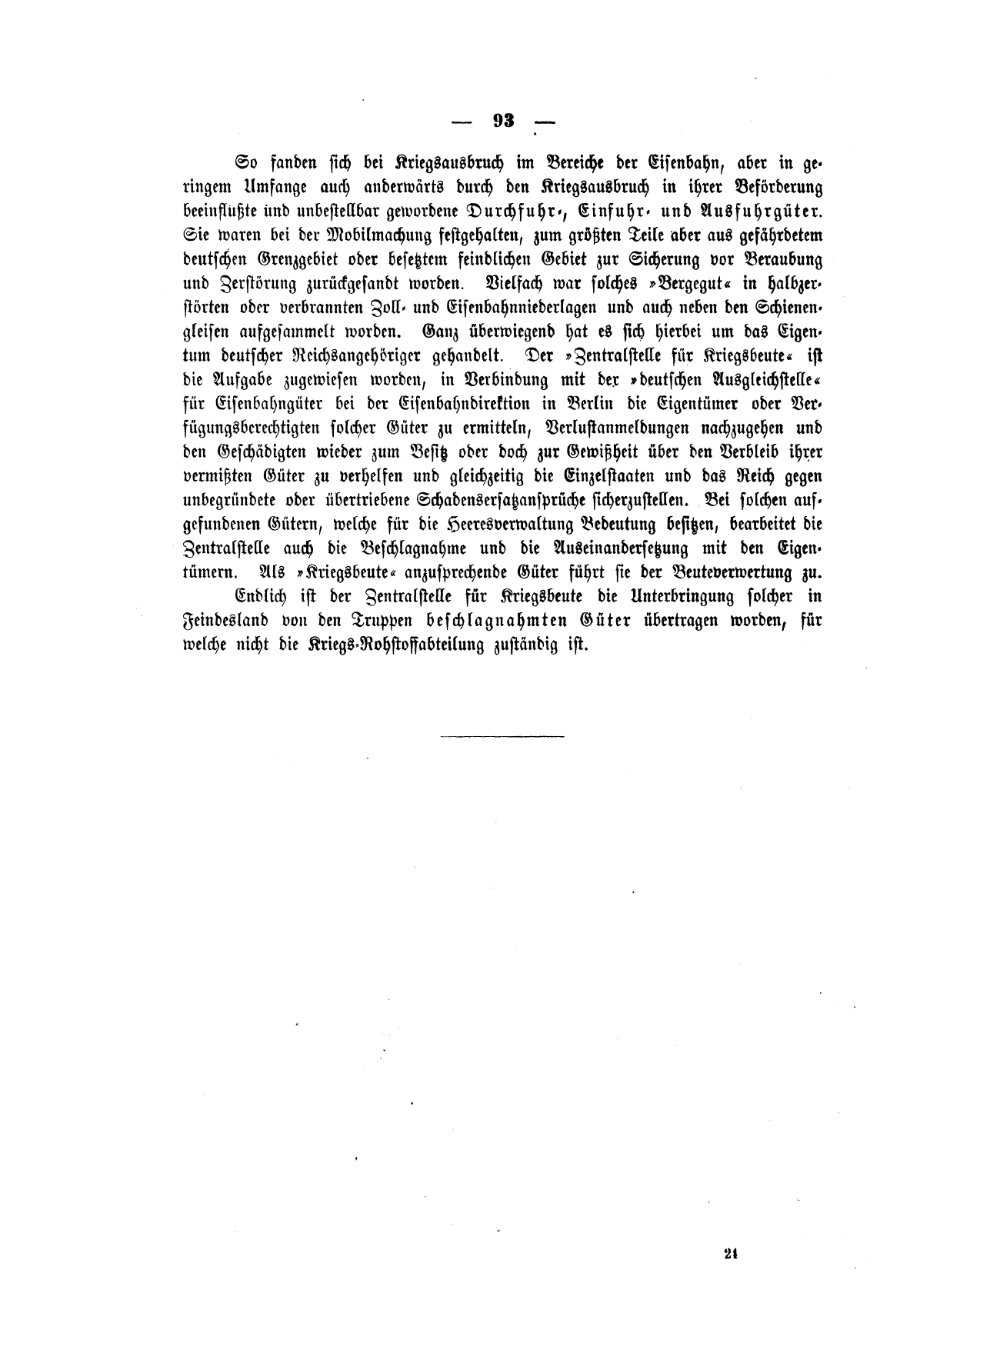 Scan of page 93